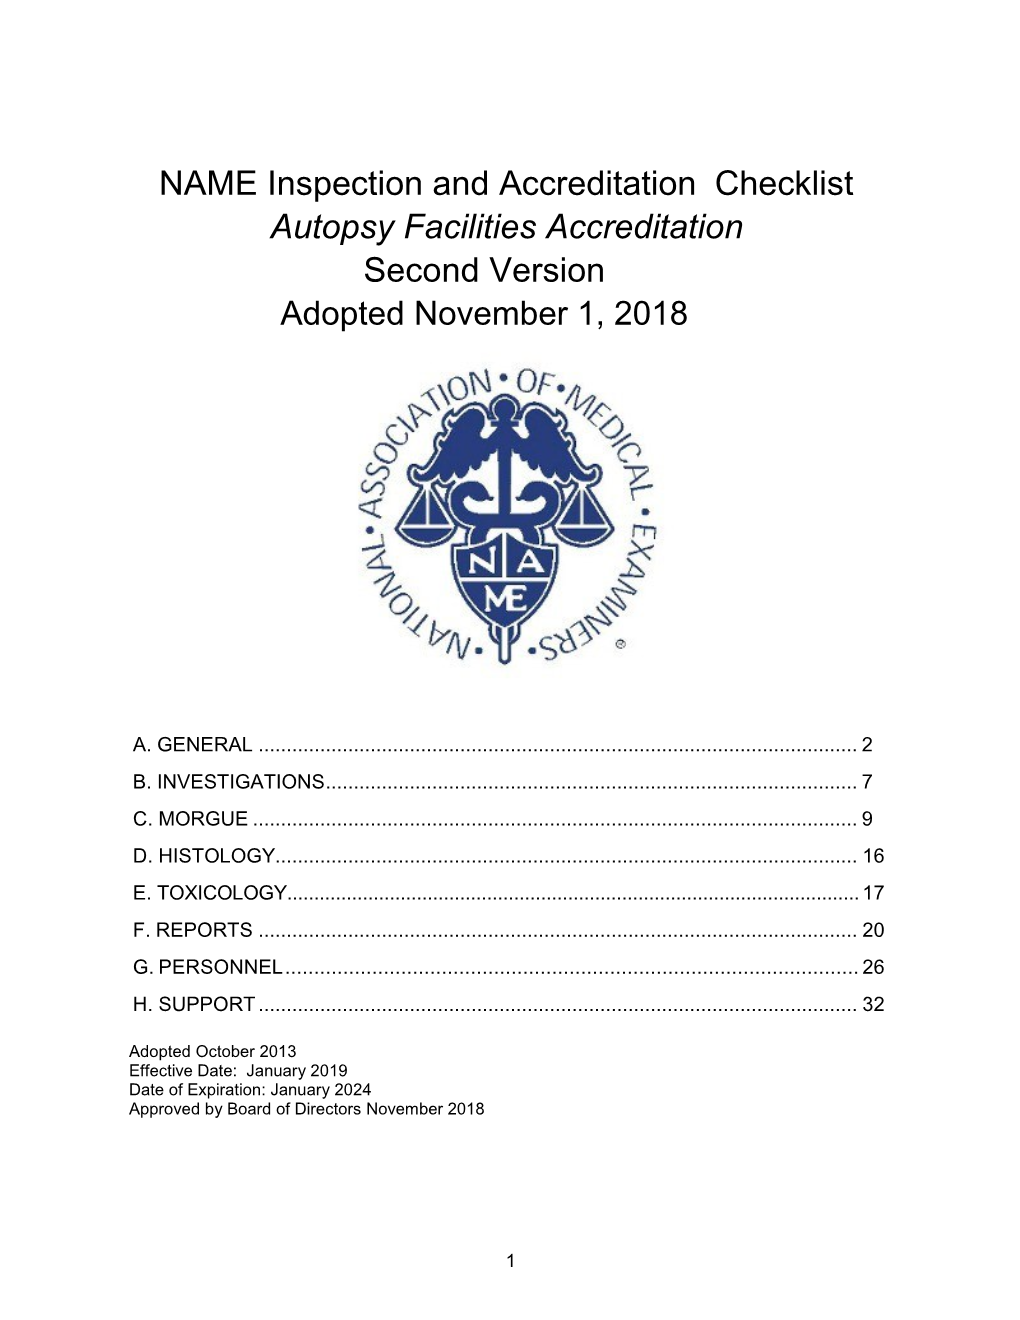 NAME Inspection and Accreditation Checklist Autopsy Facilities Accreditation Second Version Adopted November 1, 2018